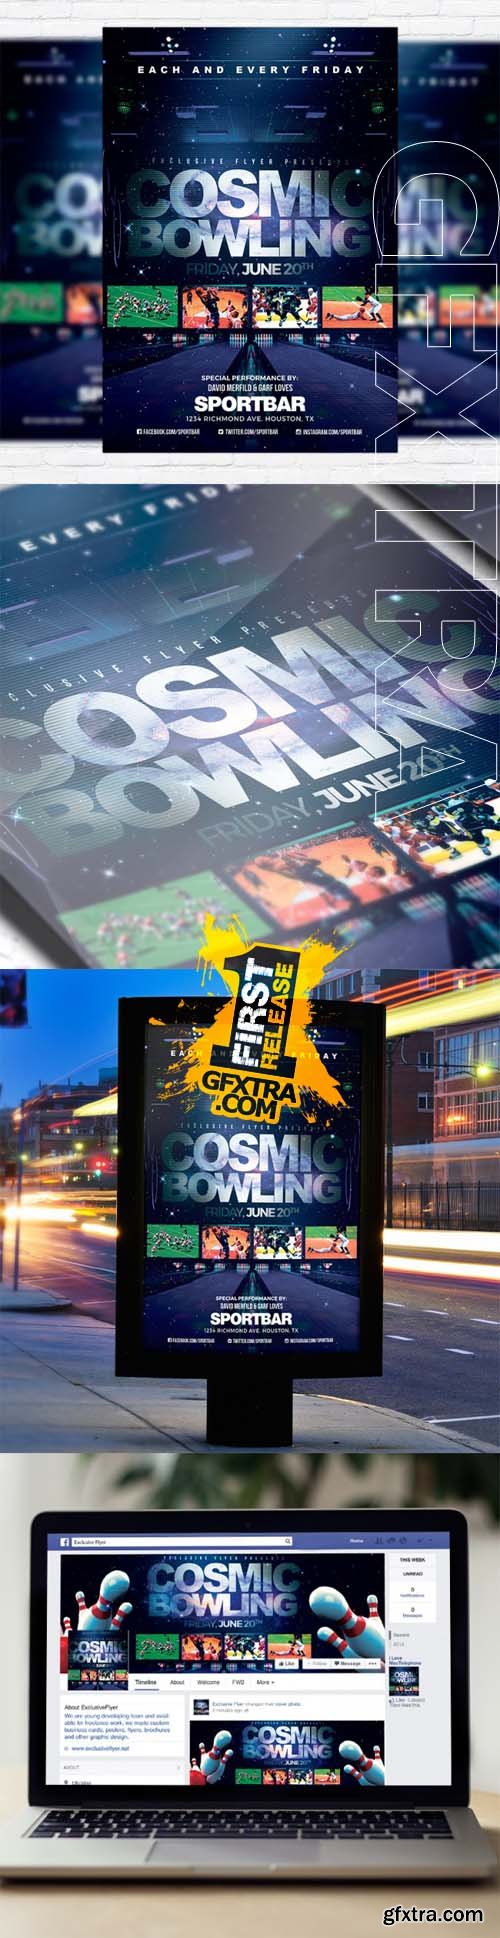 Cosmic Bowling - Flyer Template + Facebook Cover